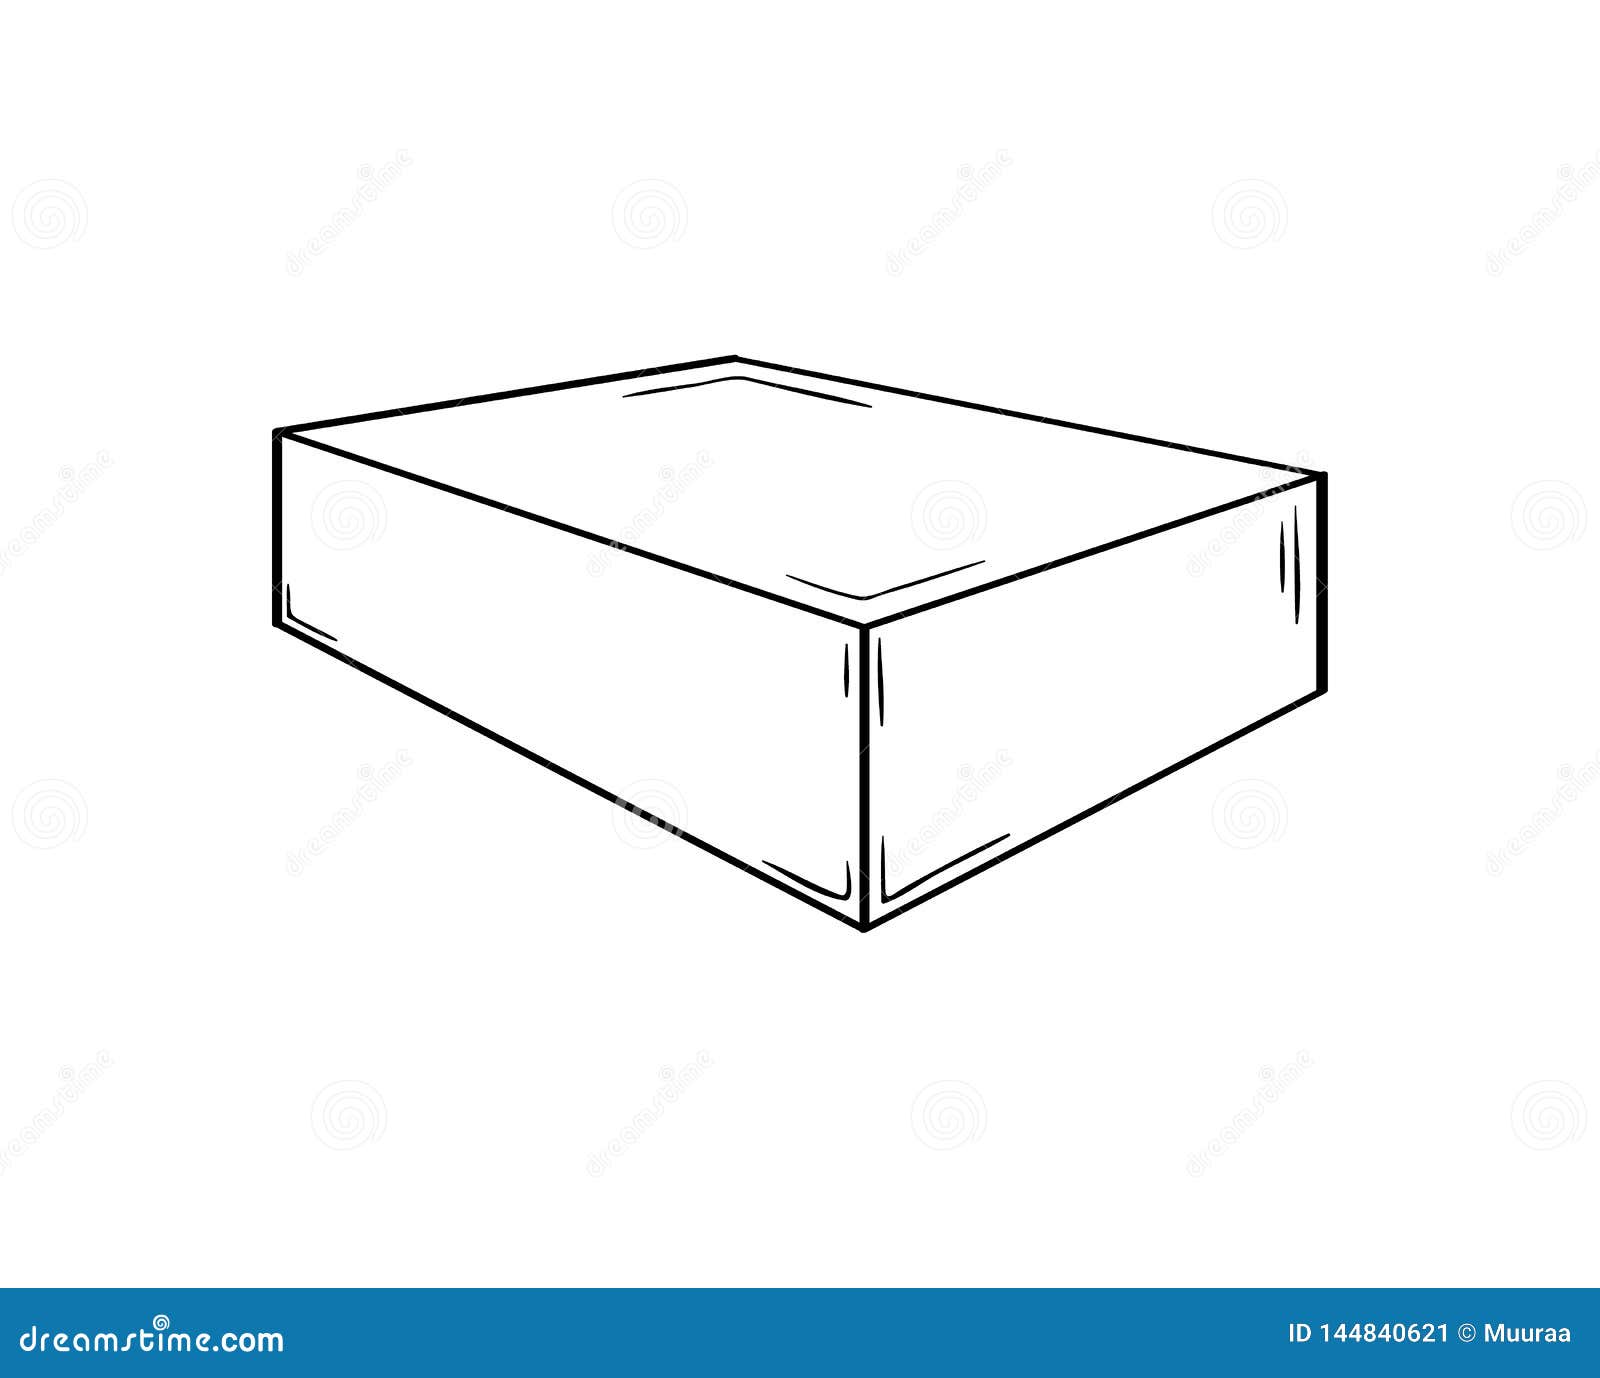 Small closed box sketch stock illustration Illustration of package   144840621